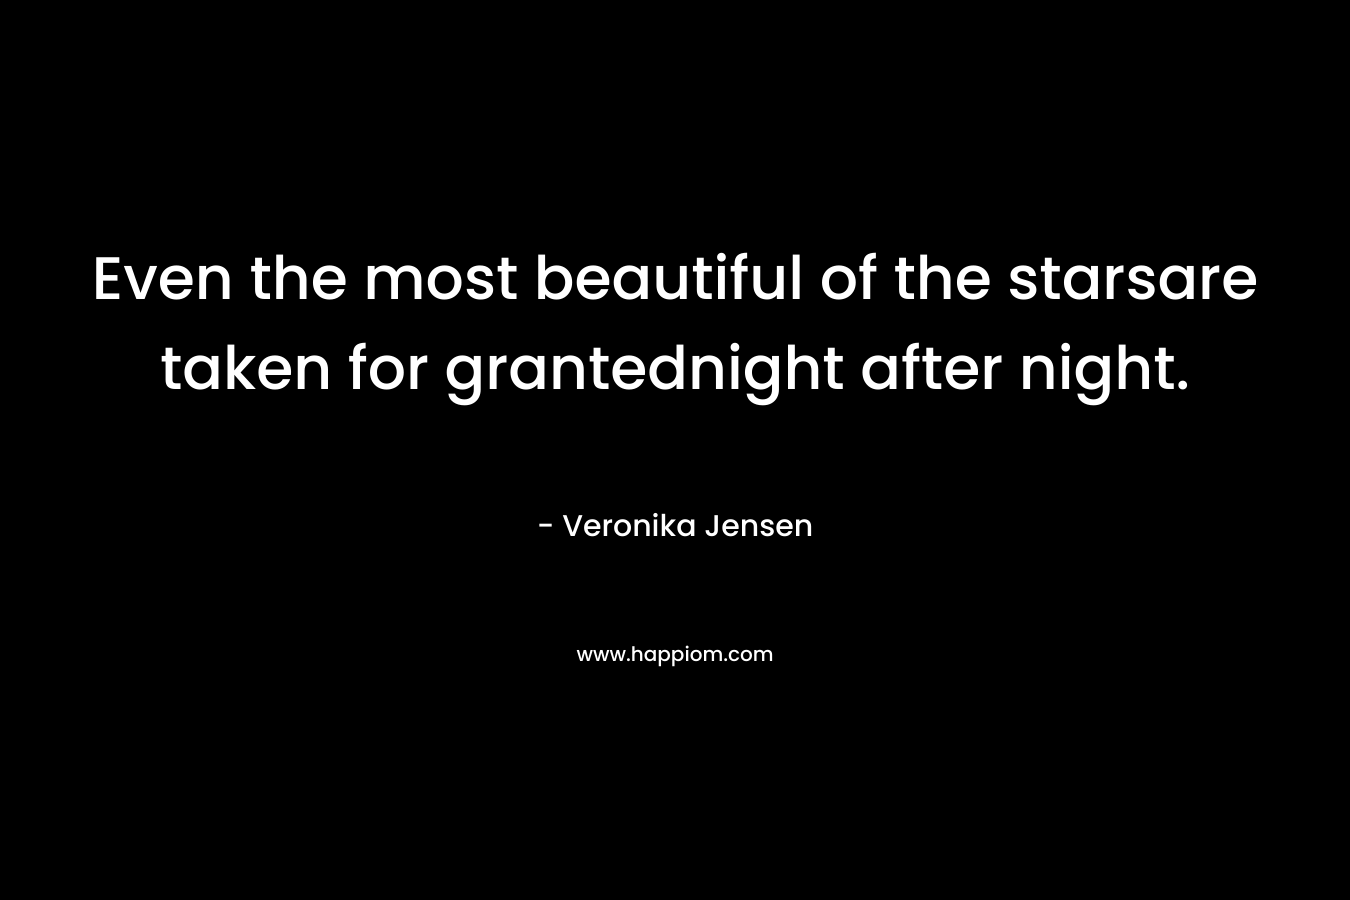 Even the most beautiful of the starsare taken for grantednight after night. – Veronika Jensen